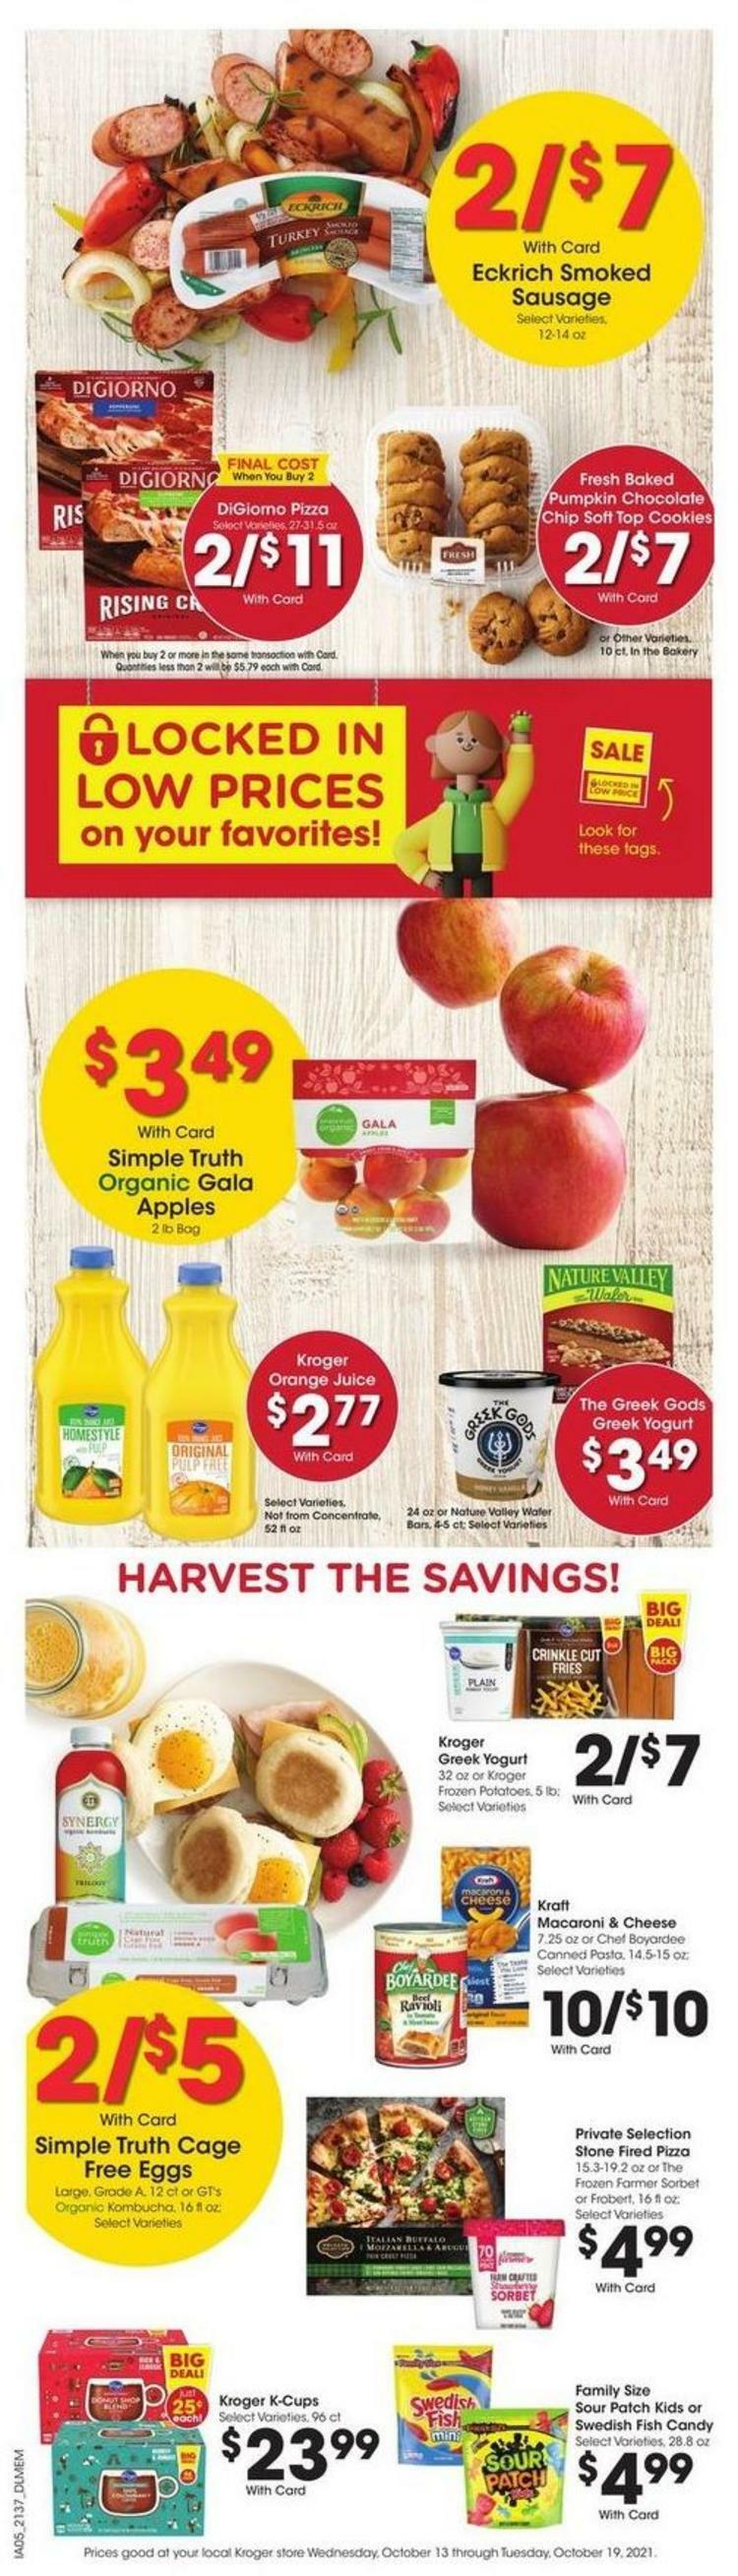 Kroger Weekly Ad from October 13